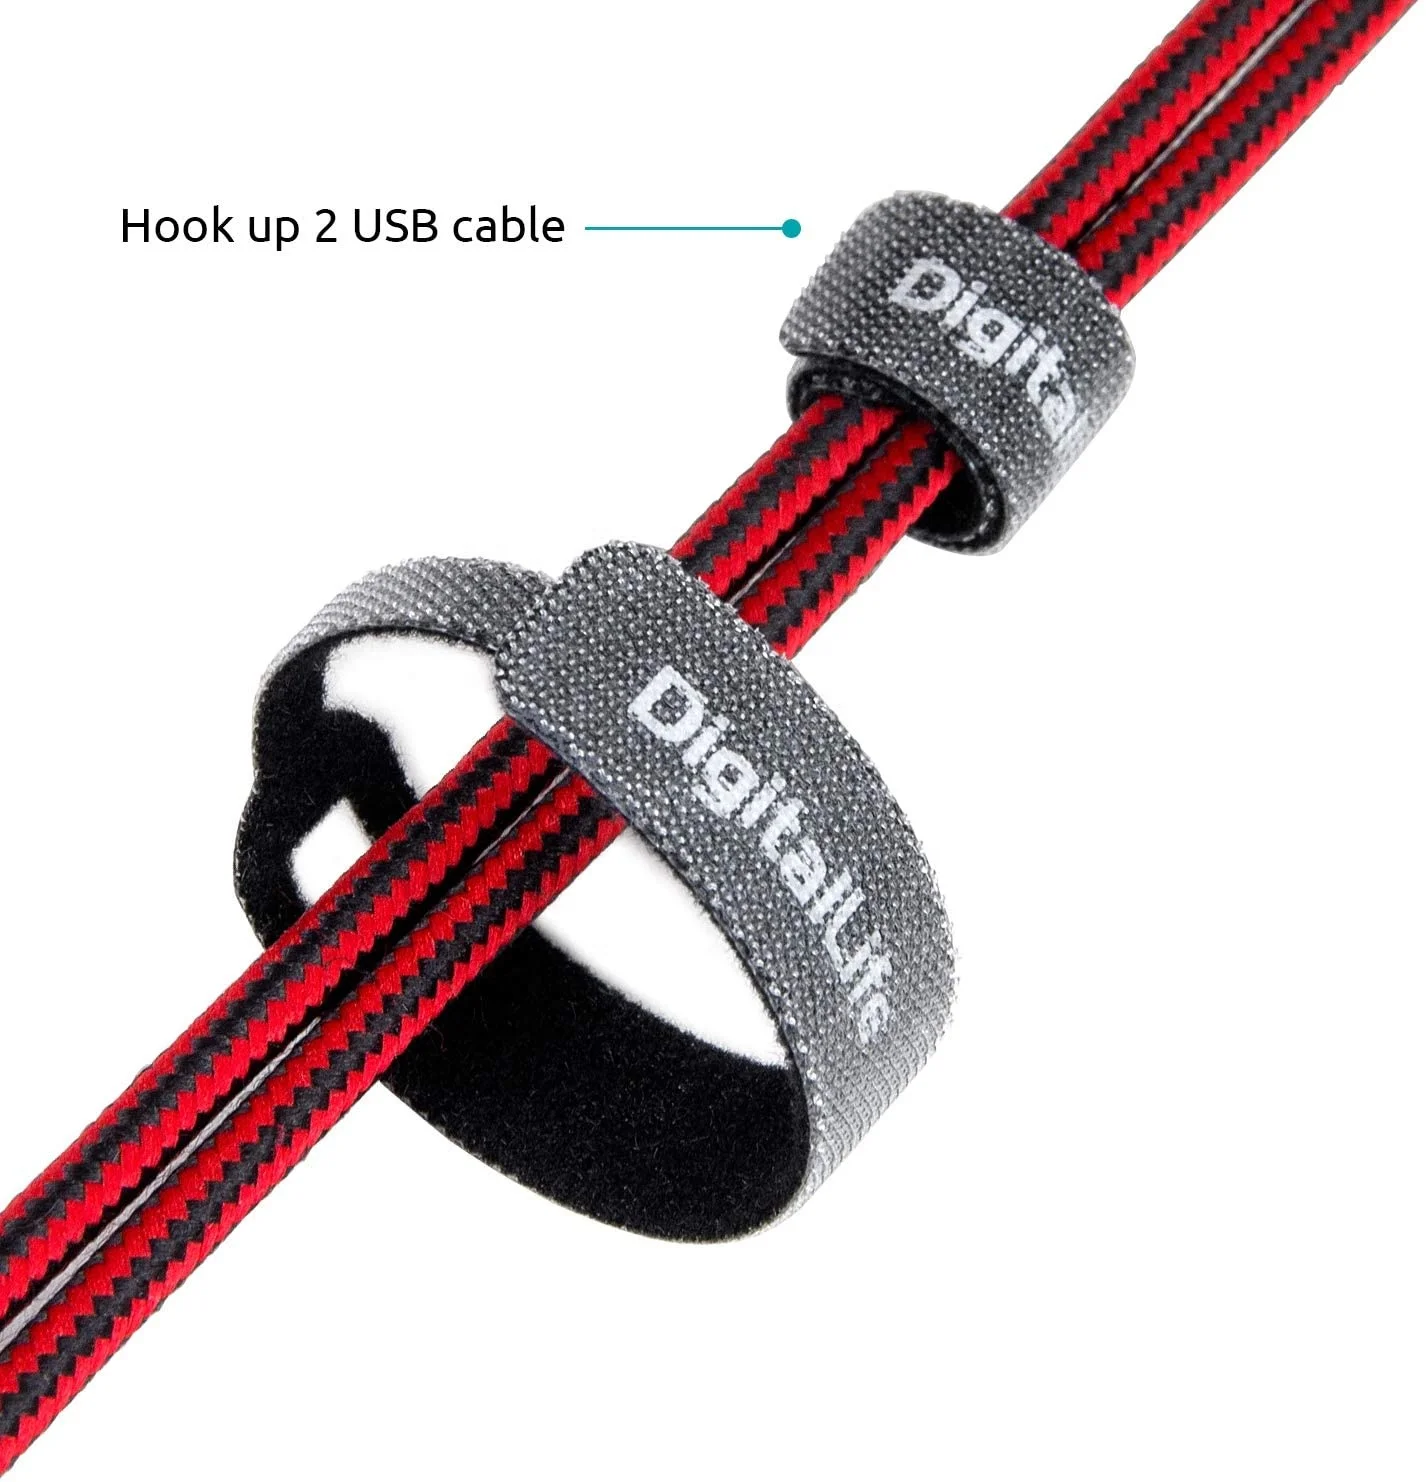 
Cable ties-Reusable Cable Straps Ties with Self Gripping Hook for Thin Cable Storage Wrapping - Self Adhesive Strips - 80 pcs 